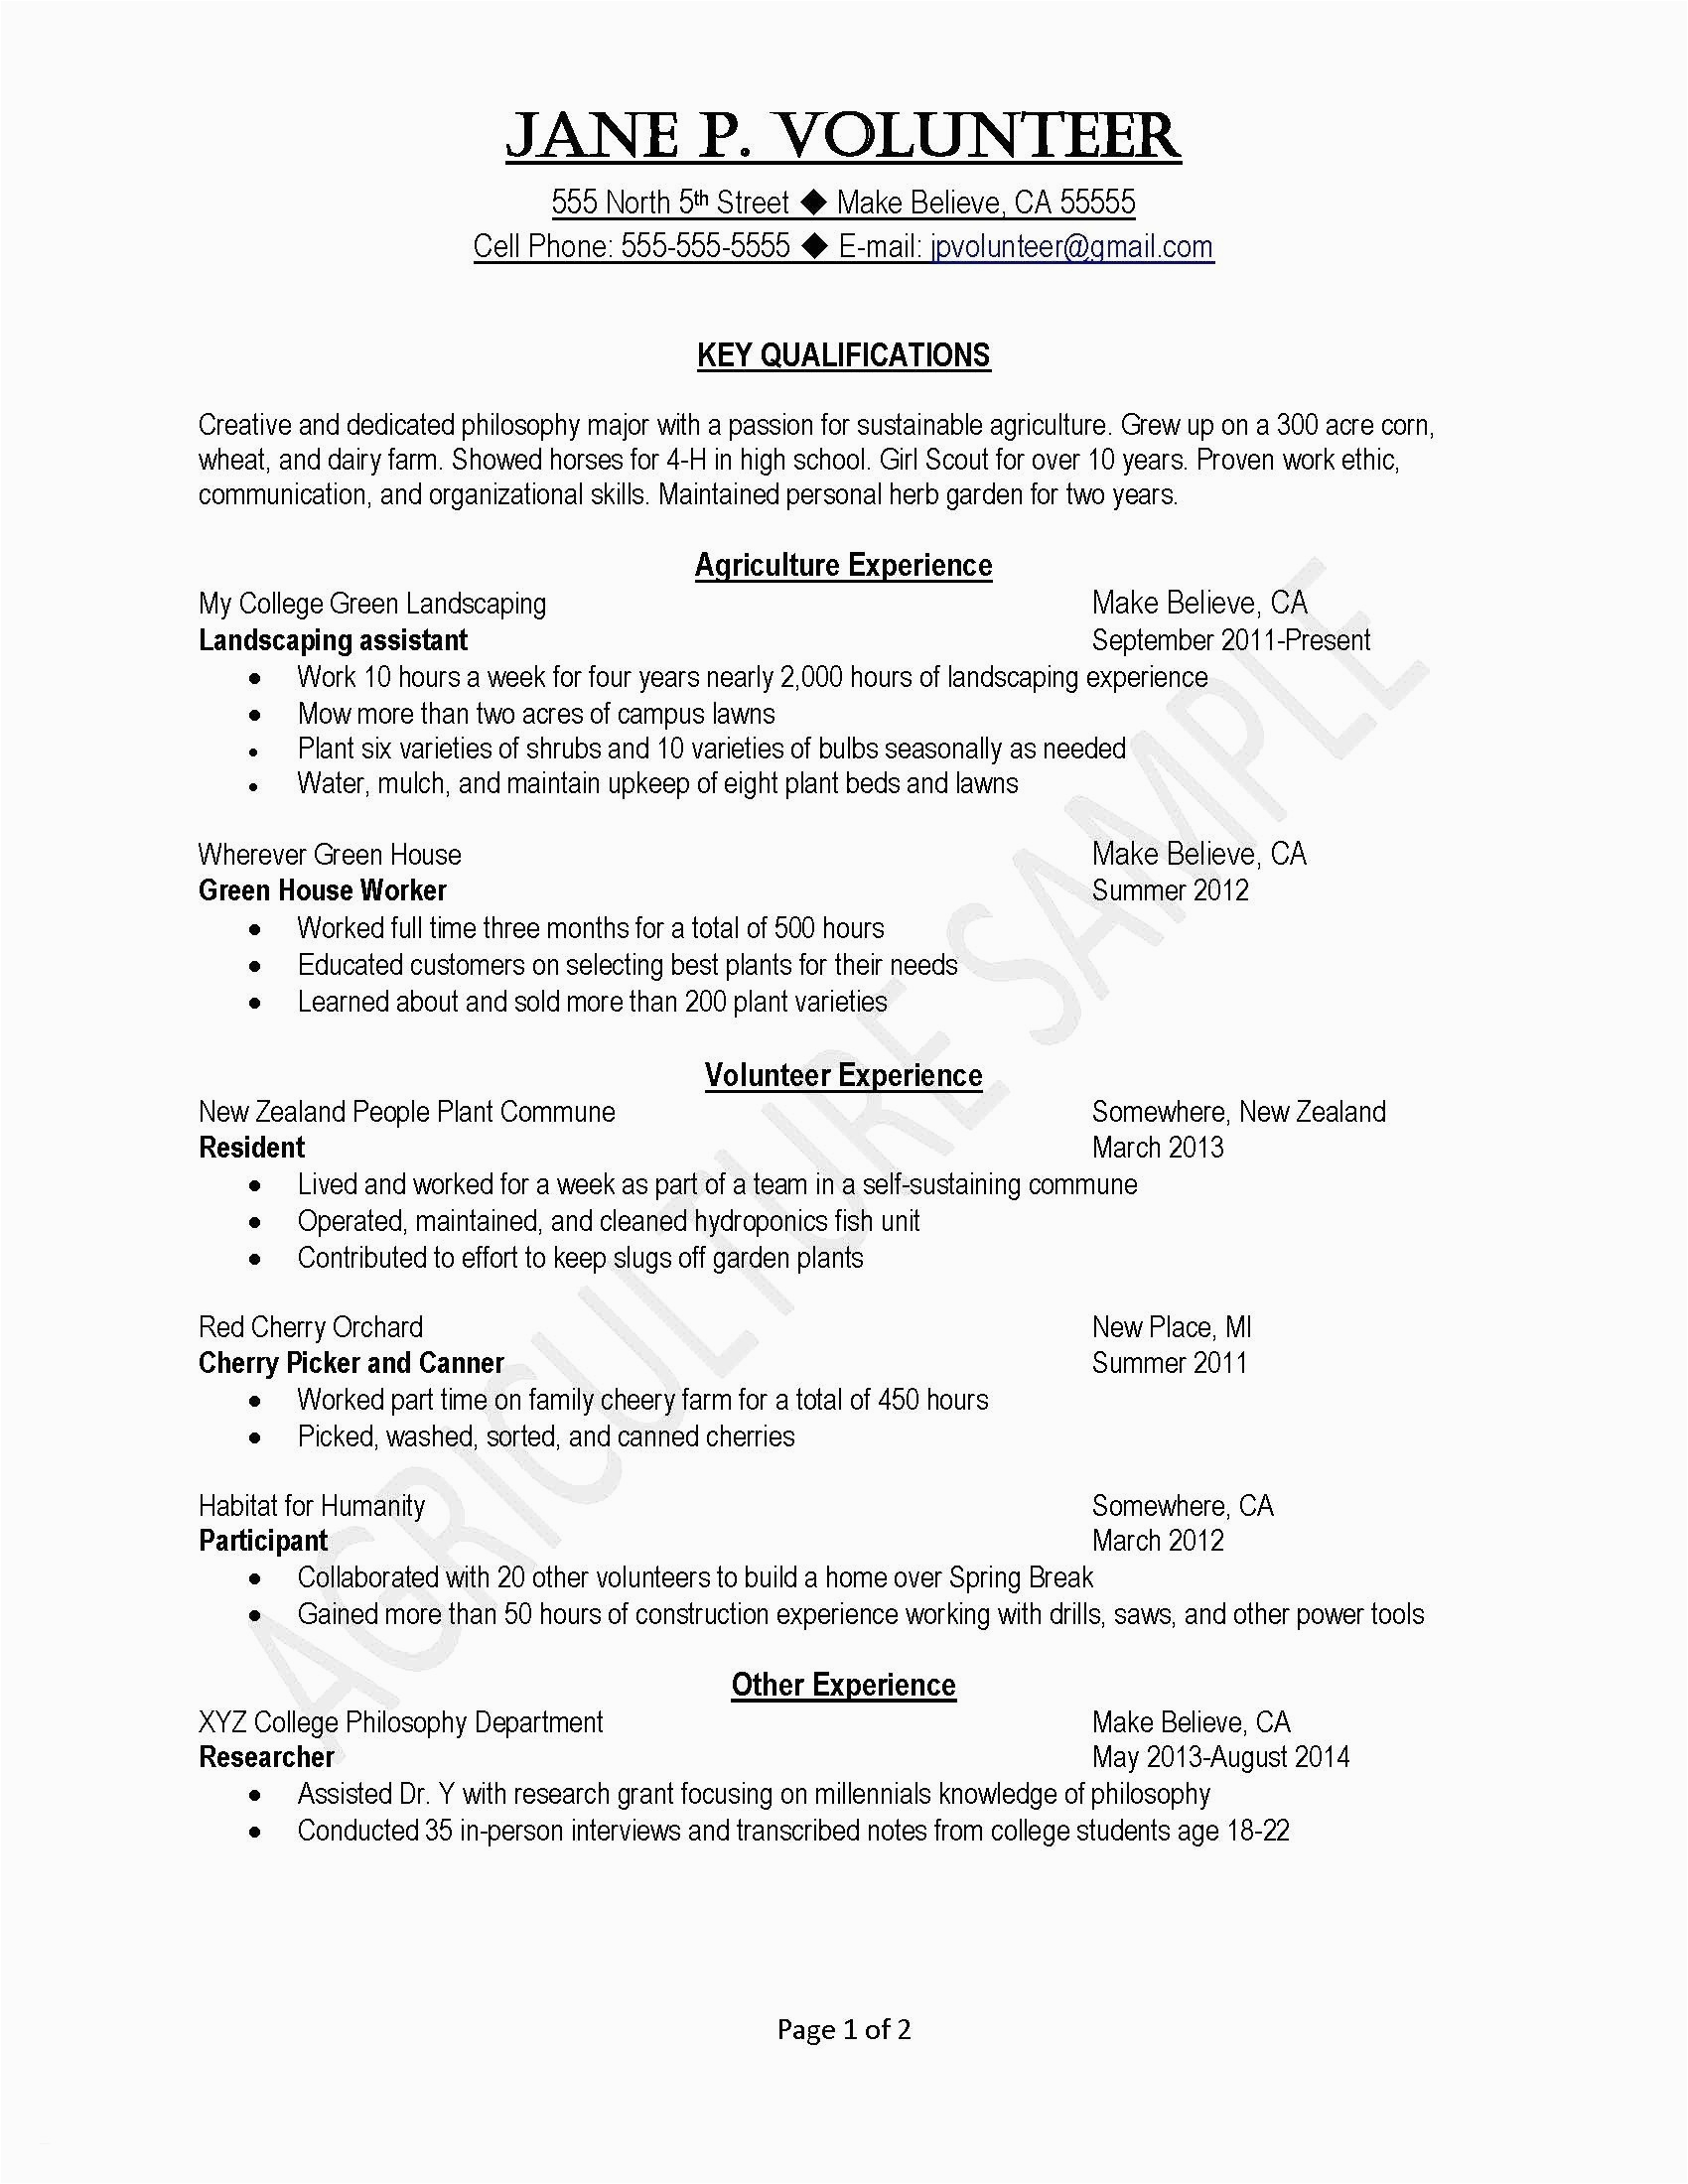 Resume Objective Samples for High School Students Job Resume Samples for High School Students